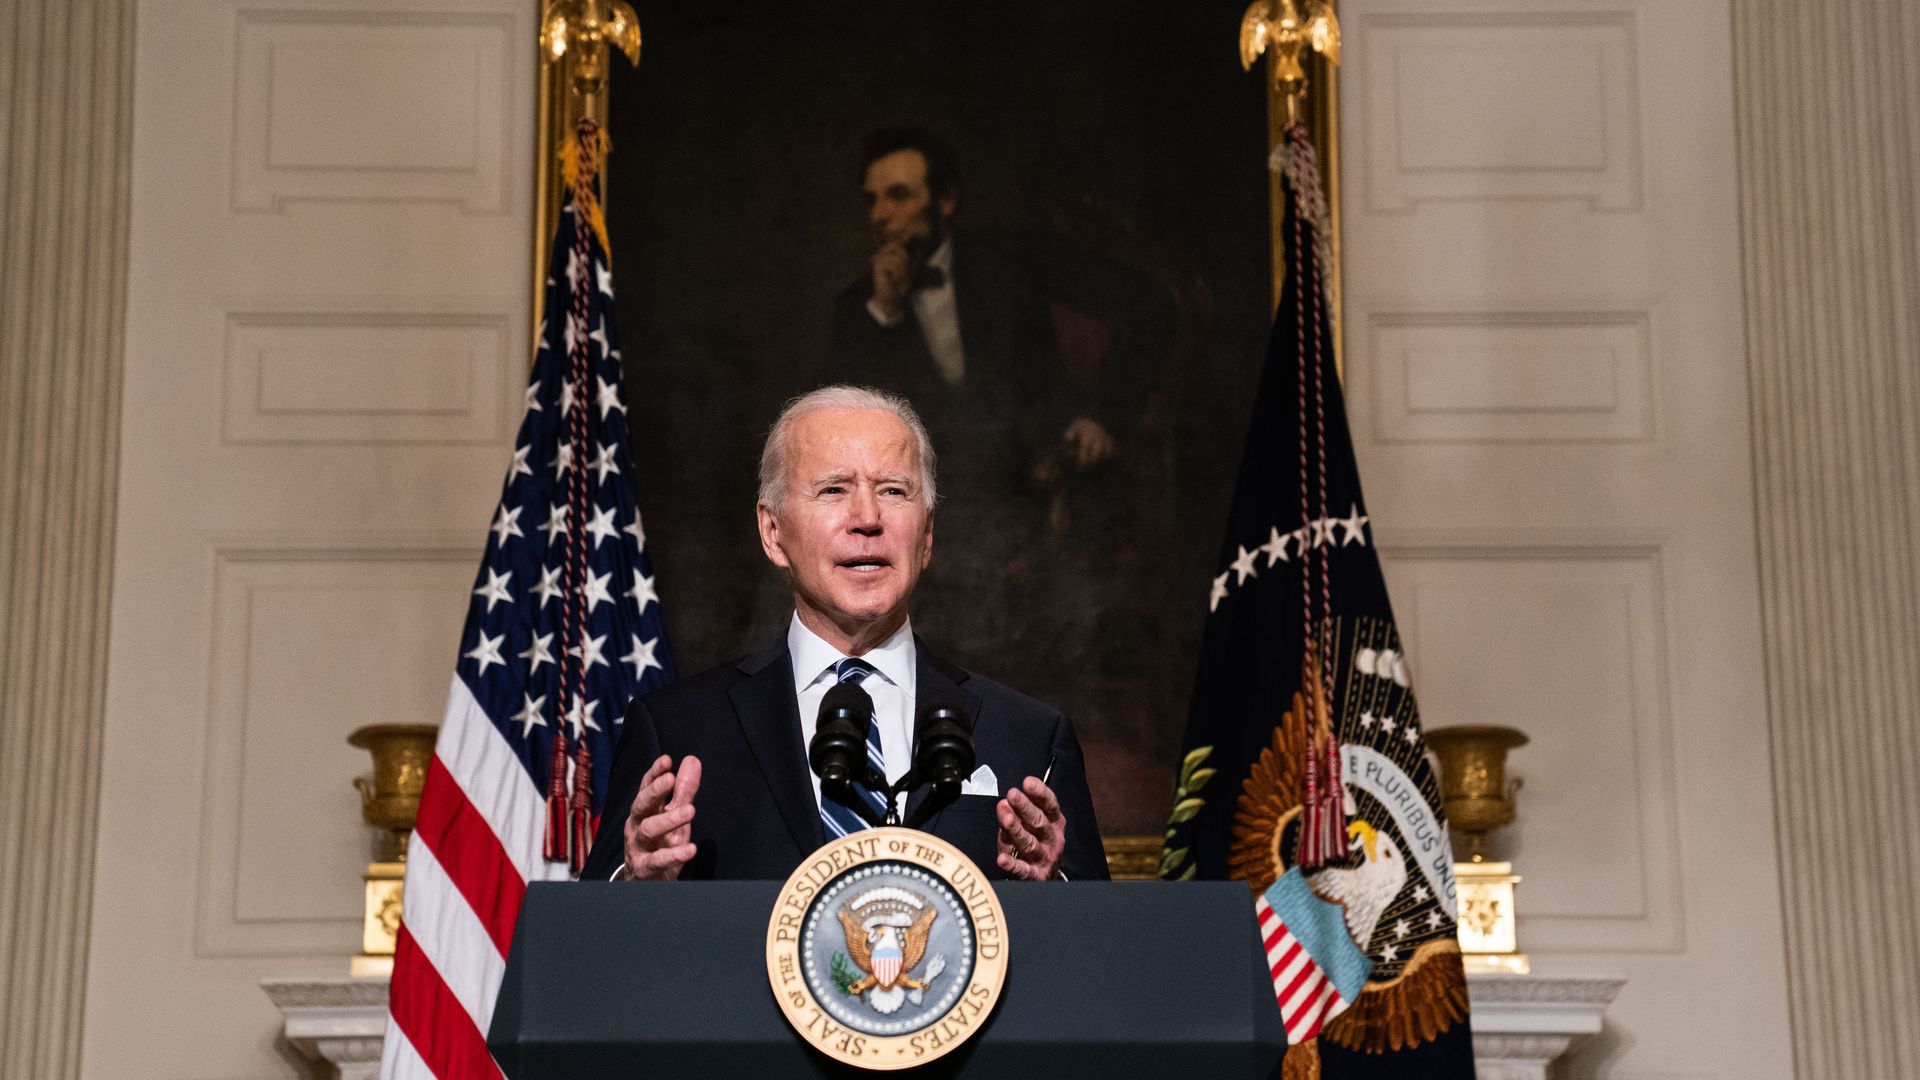 President Biden is seen speaking at the White House beneath a portrait of Abraham Lincoln.